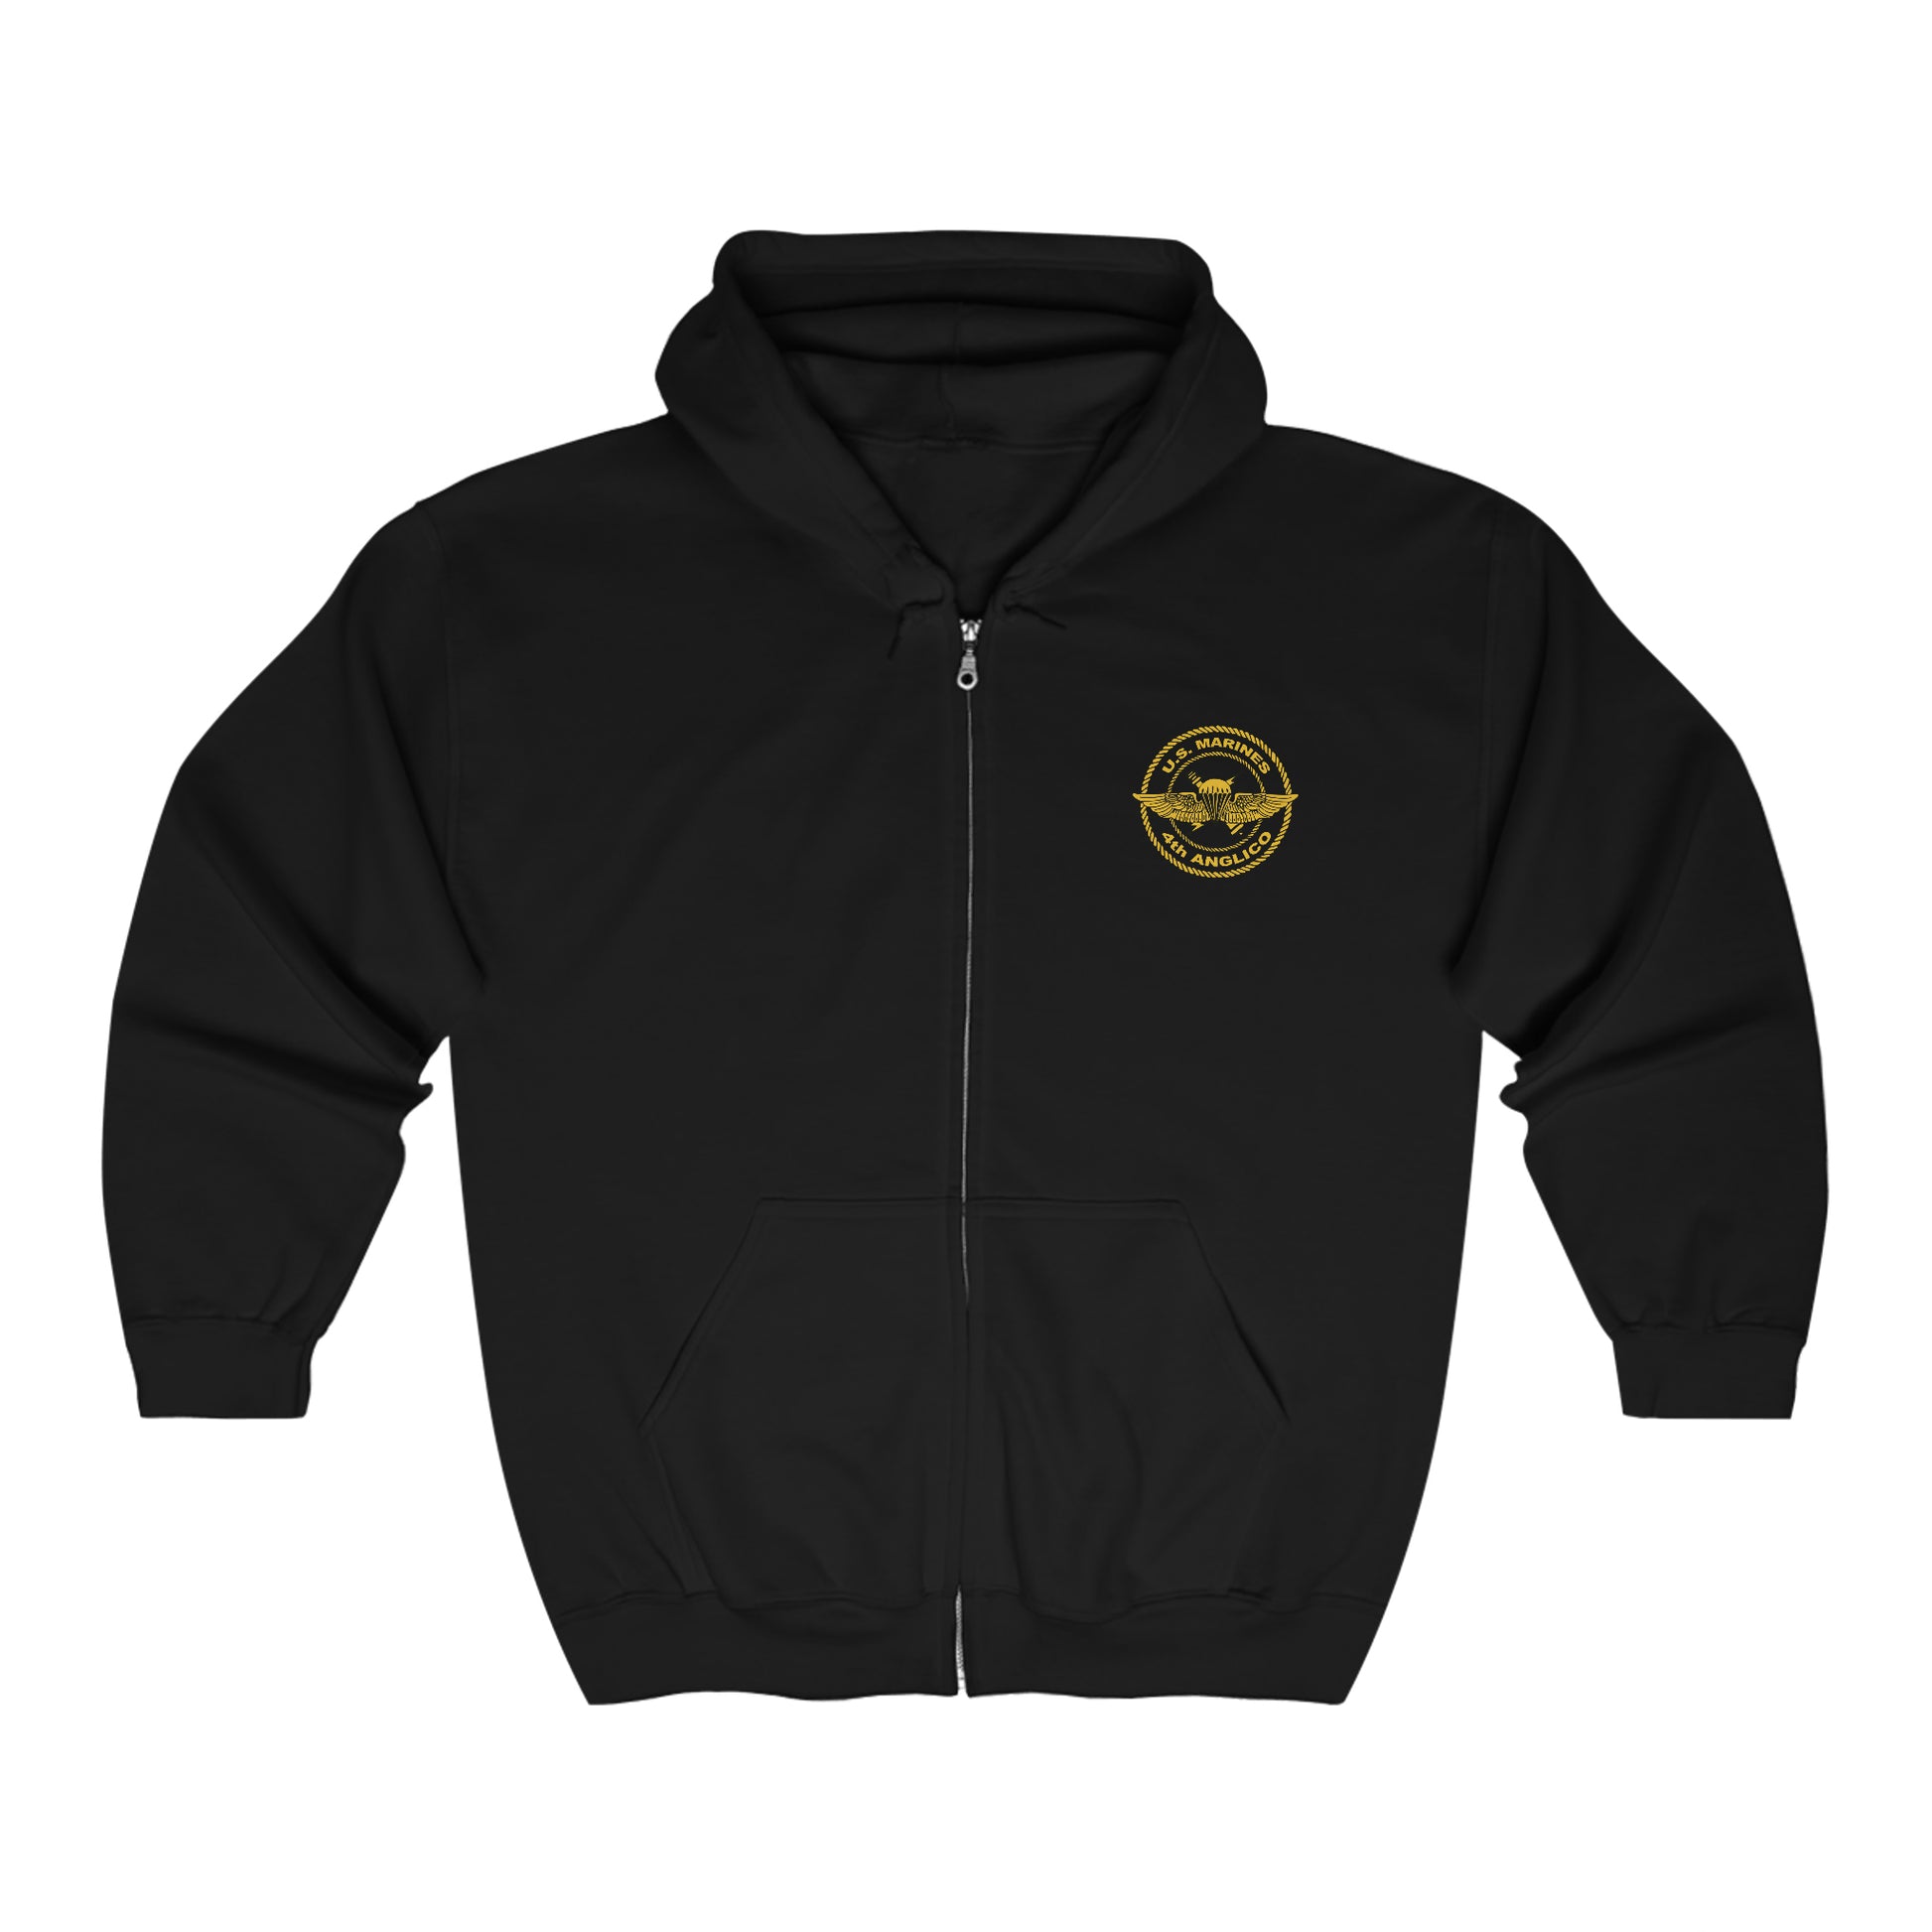 Black 4th ANGLICO Zip Hoodie